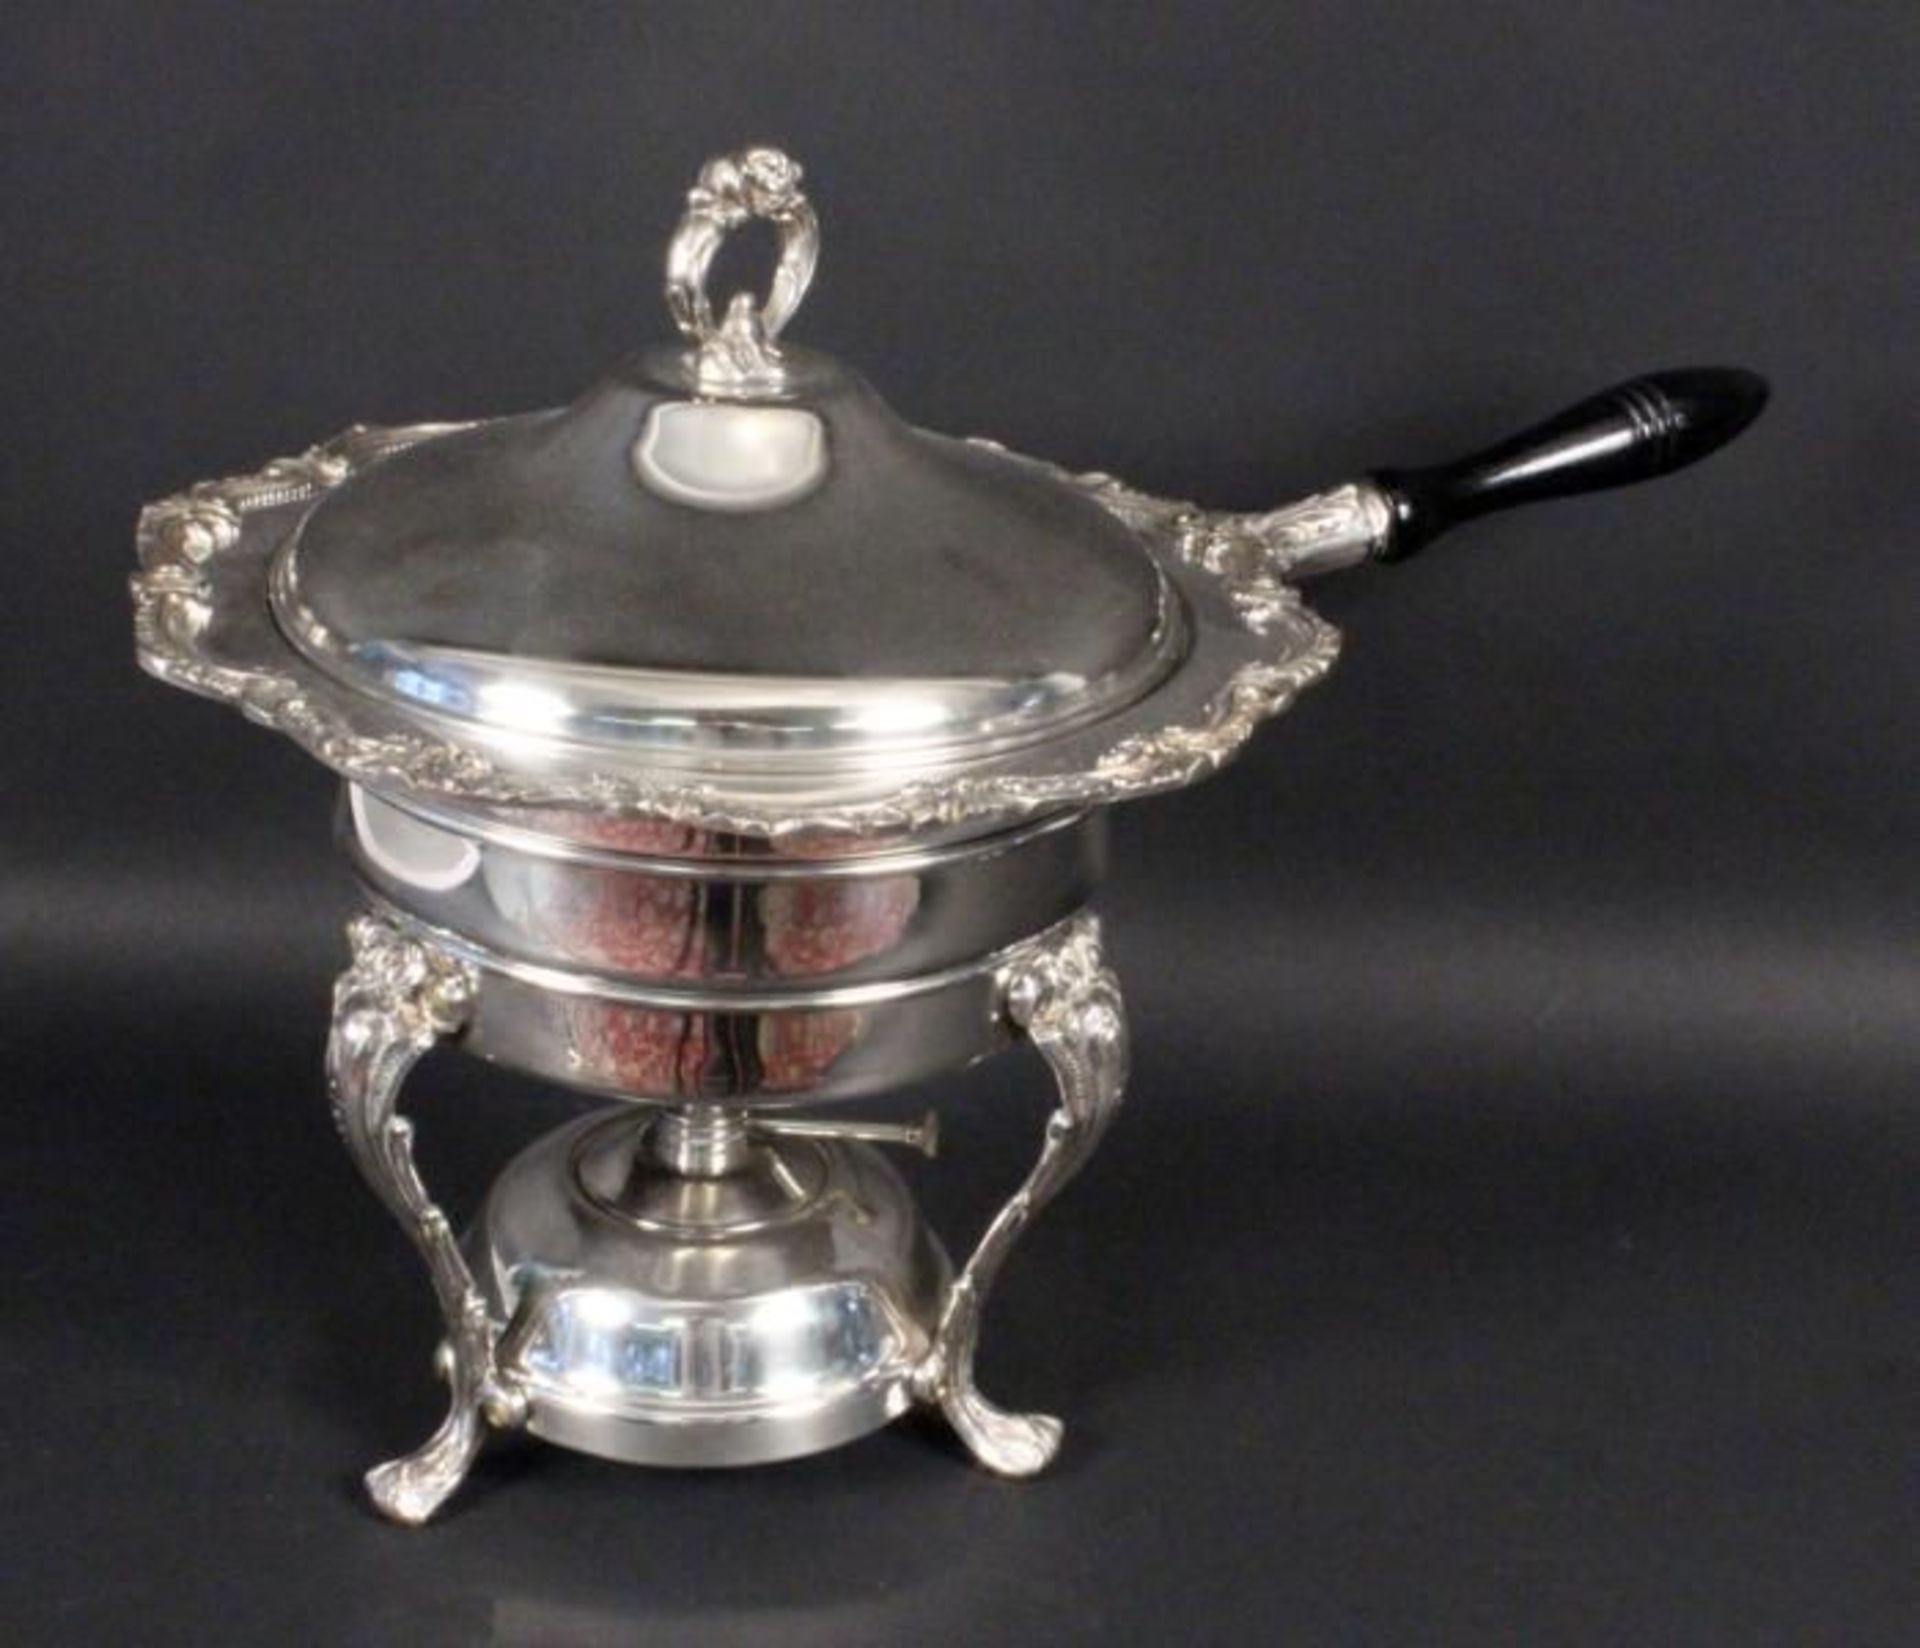 A FONDUE PAN USA, 20th century Pan with lid, water bath, stand and rechaud, silver plate with